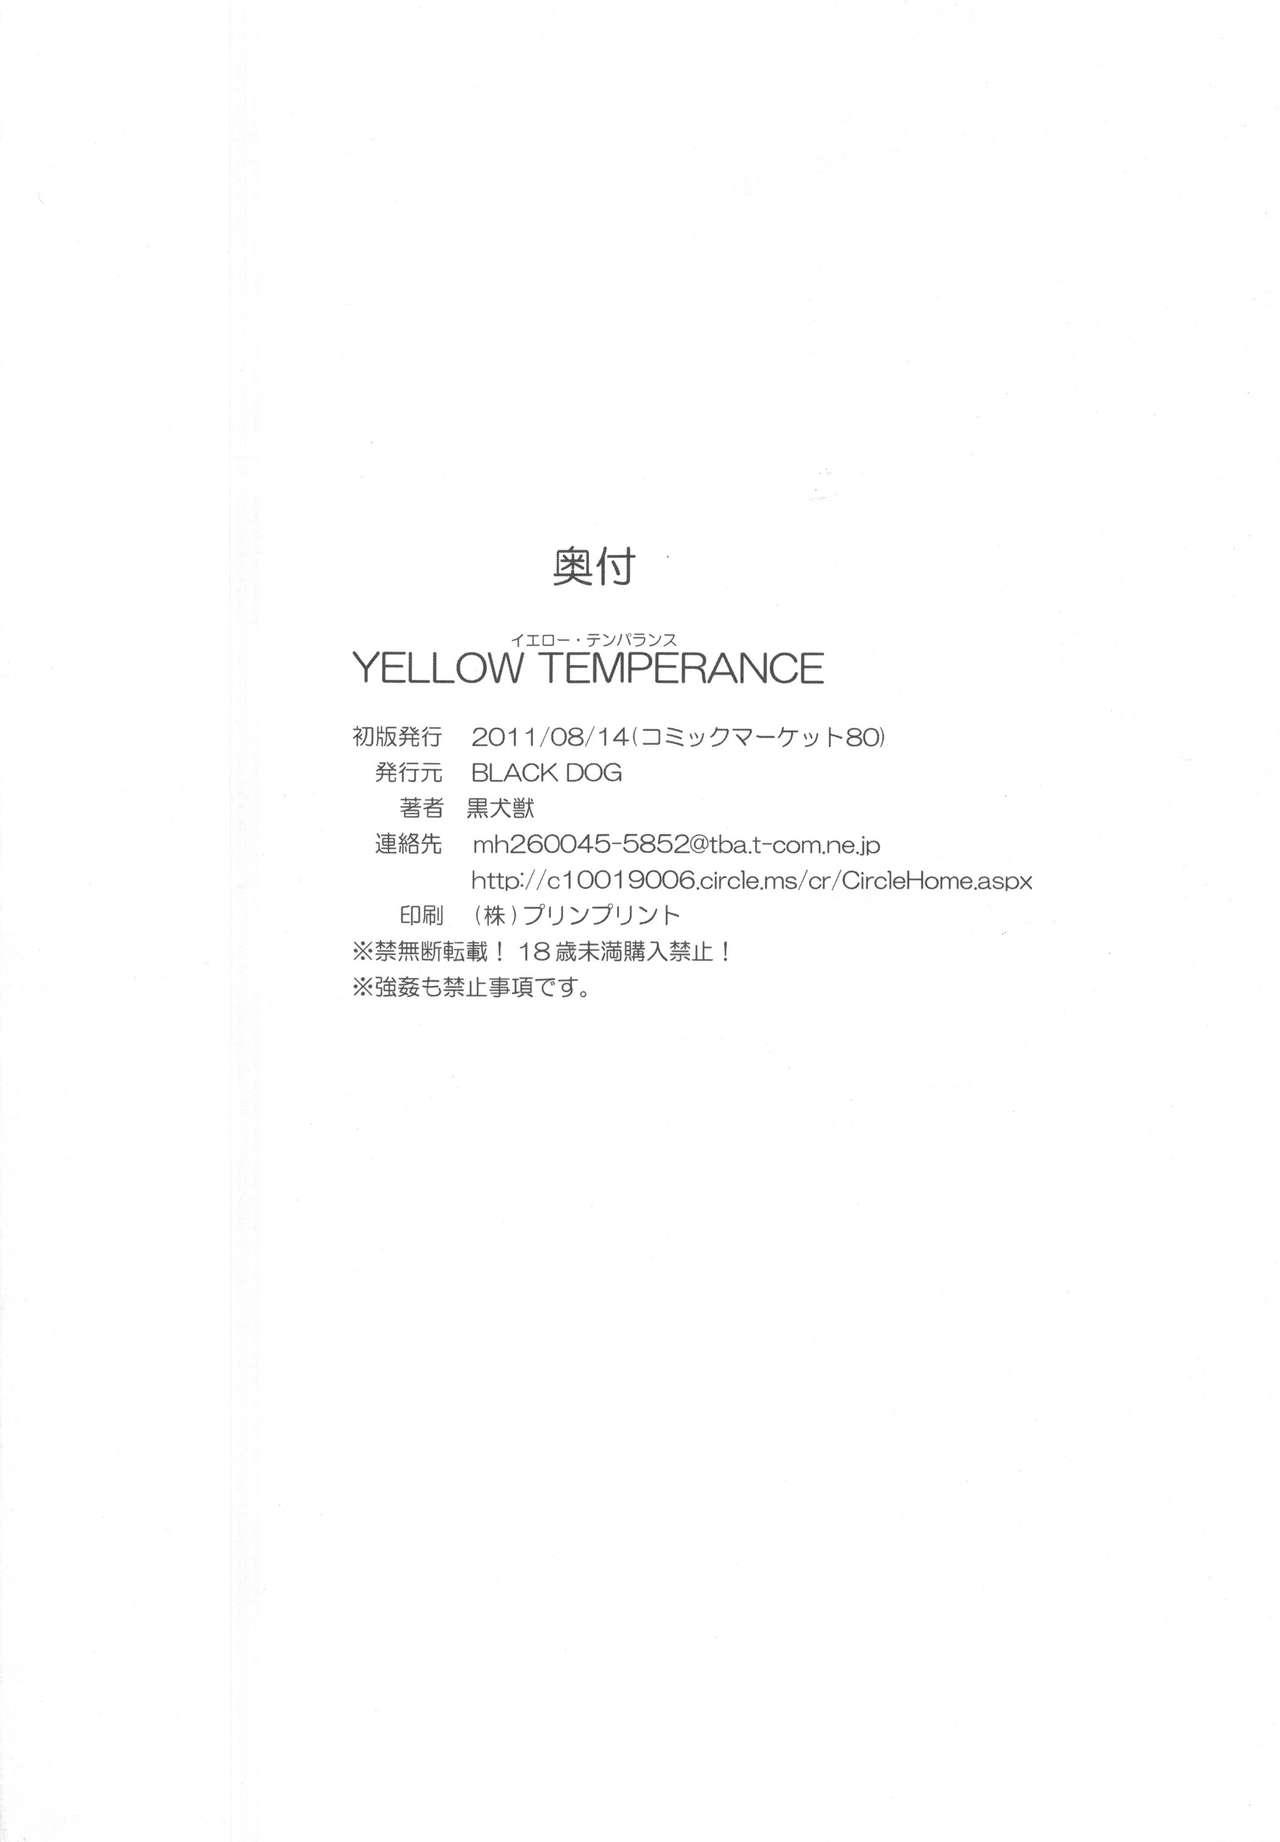 One YELLOW TEMPERANCE - Sailor moon Glamour Porn - Page 53